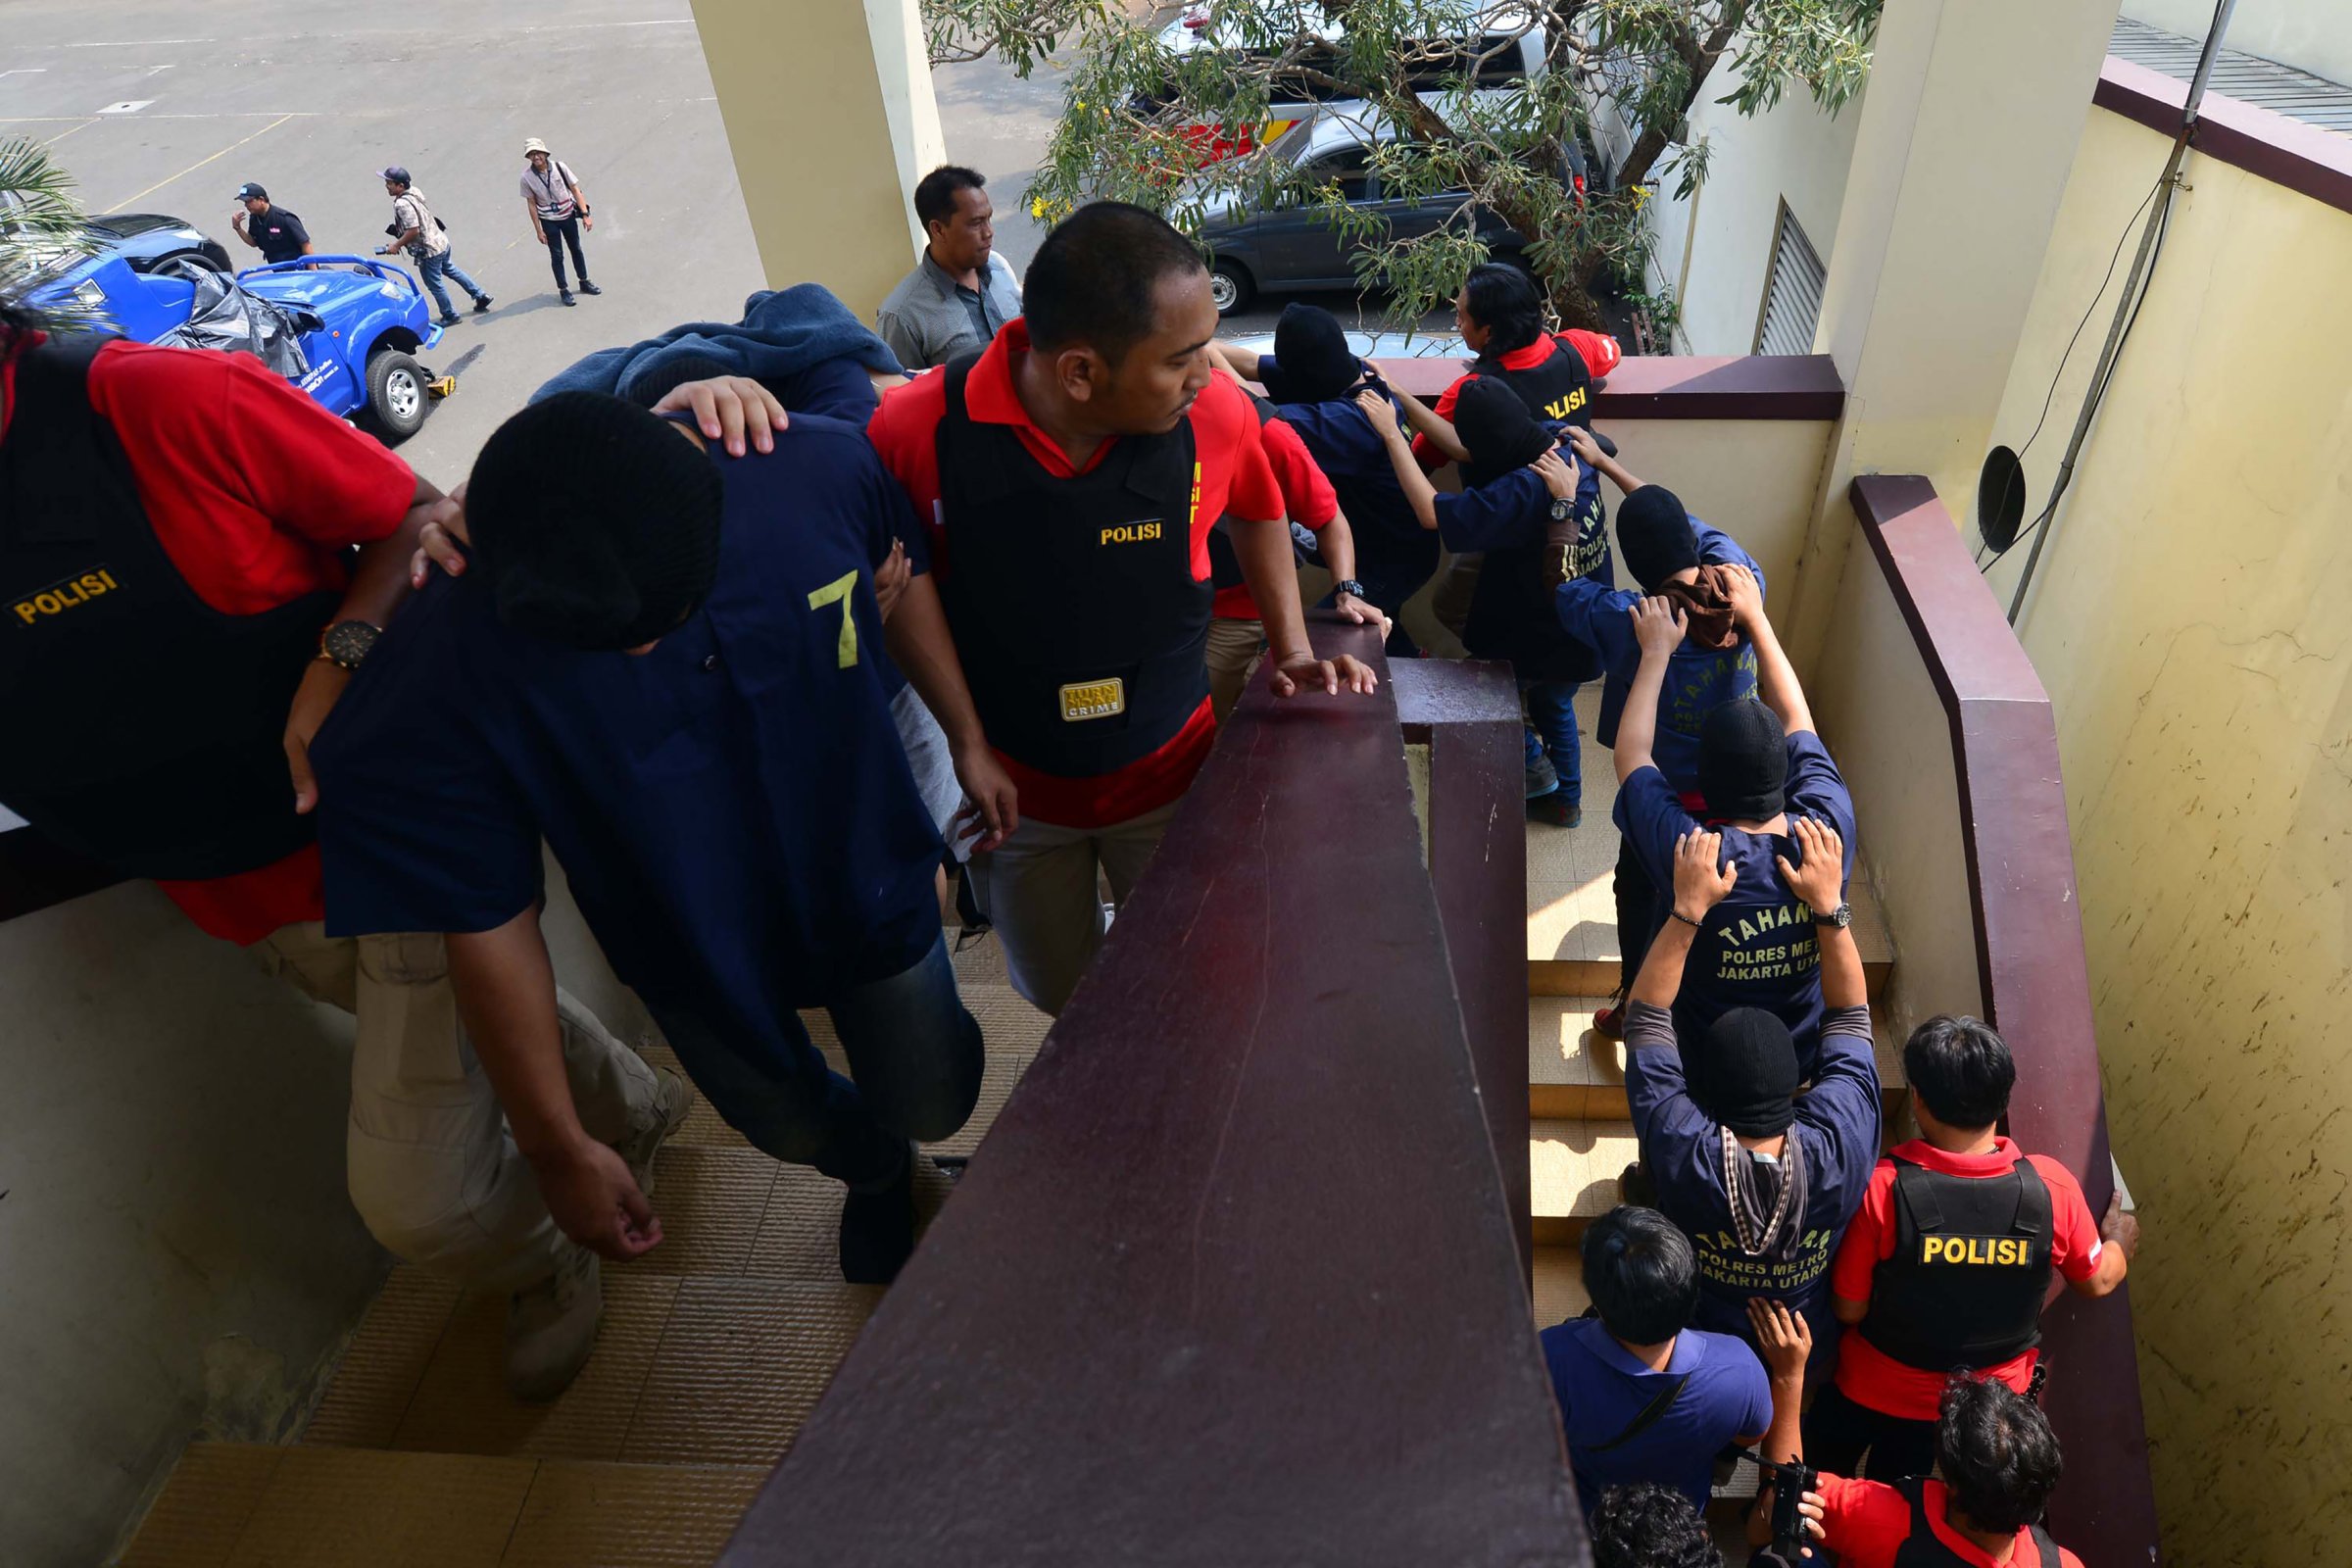 Indonesian police guard men arrested in a recent raid during a press conference at a police station in Jakarta on May 22, 2017.